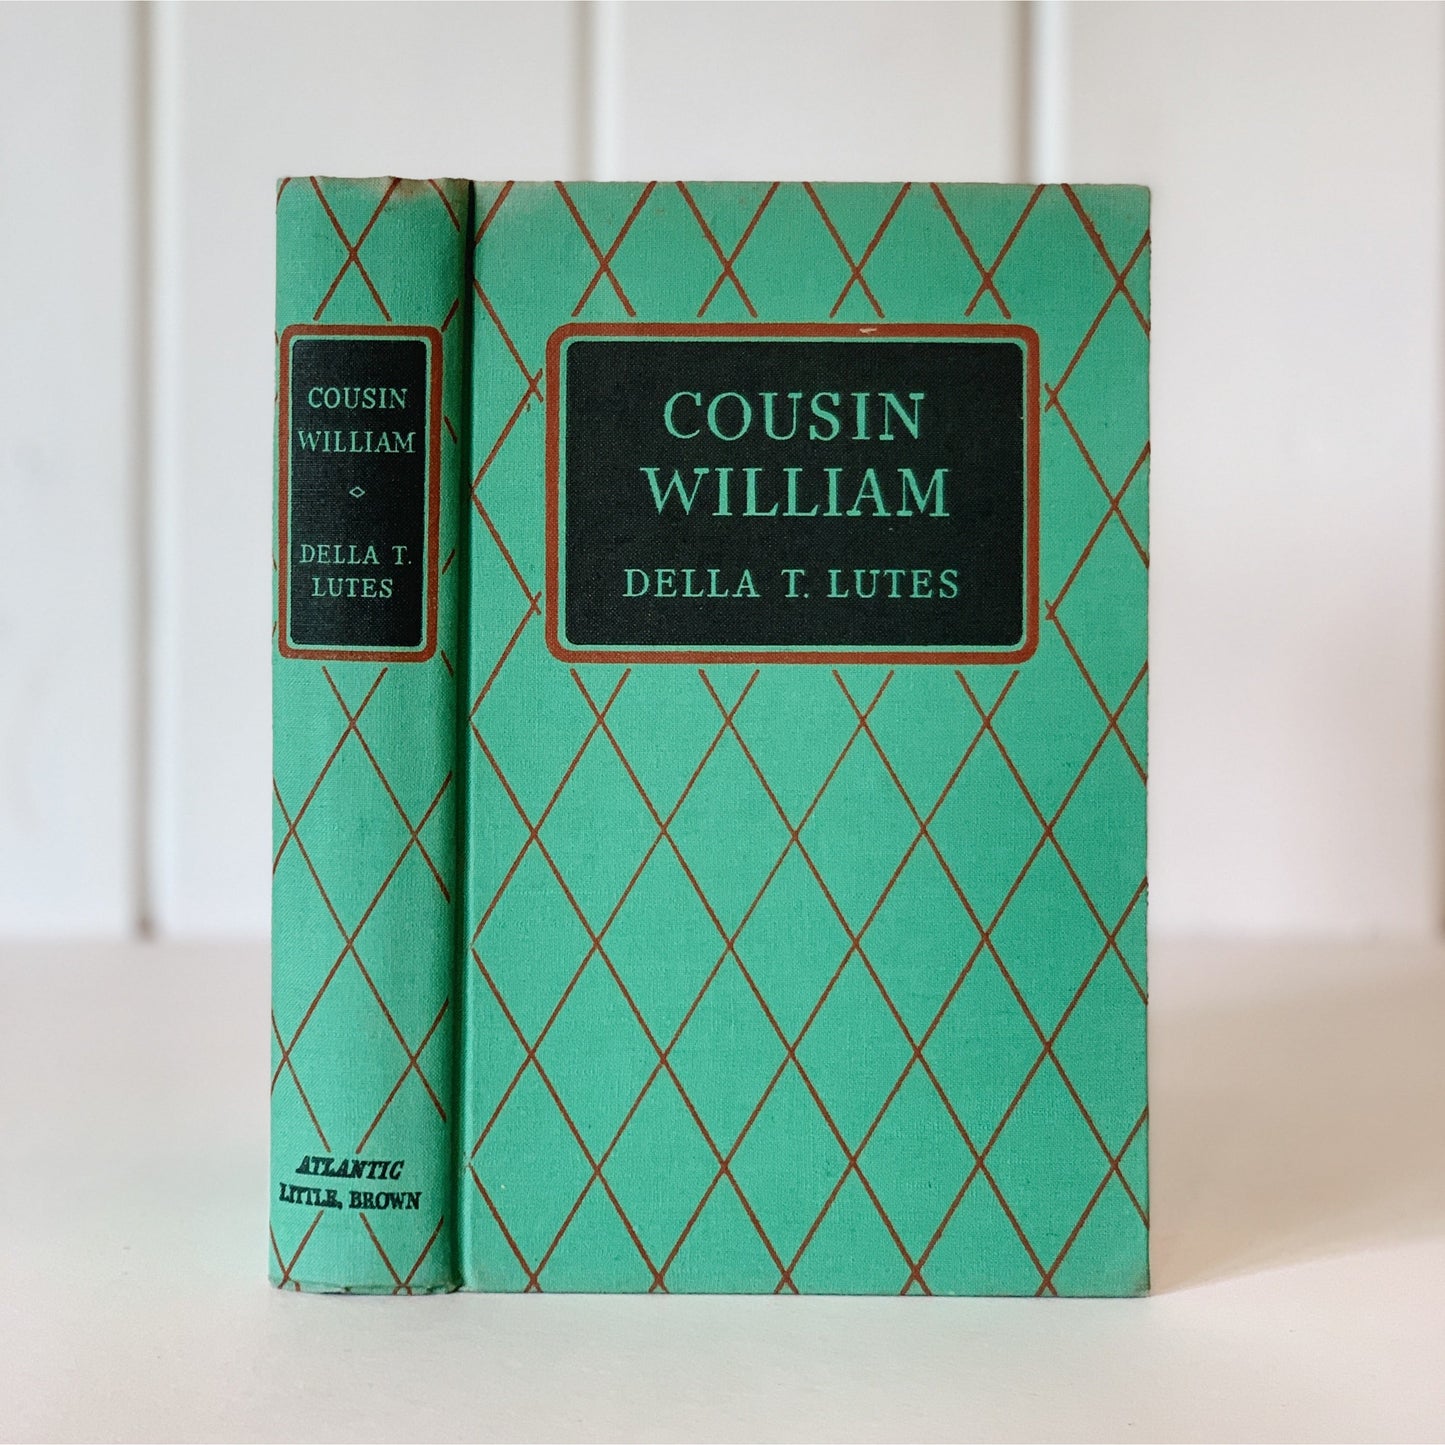 Cousin William, Della T. Lutes, First Edition, 1942, Hardcover with Dust Jacket